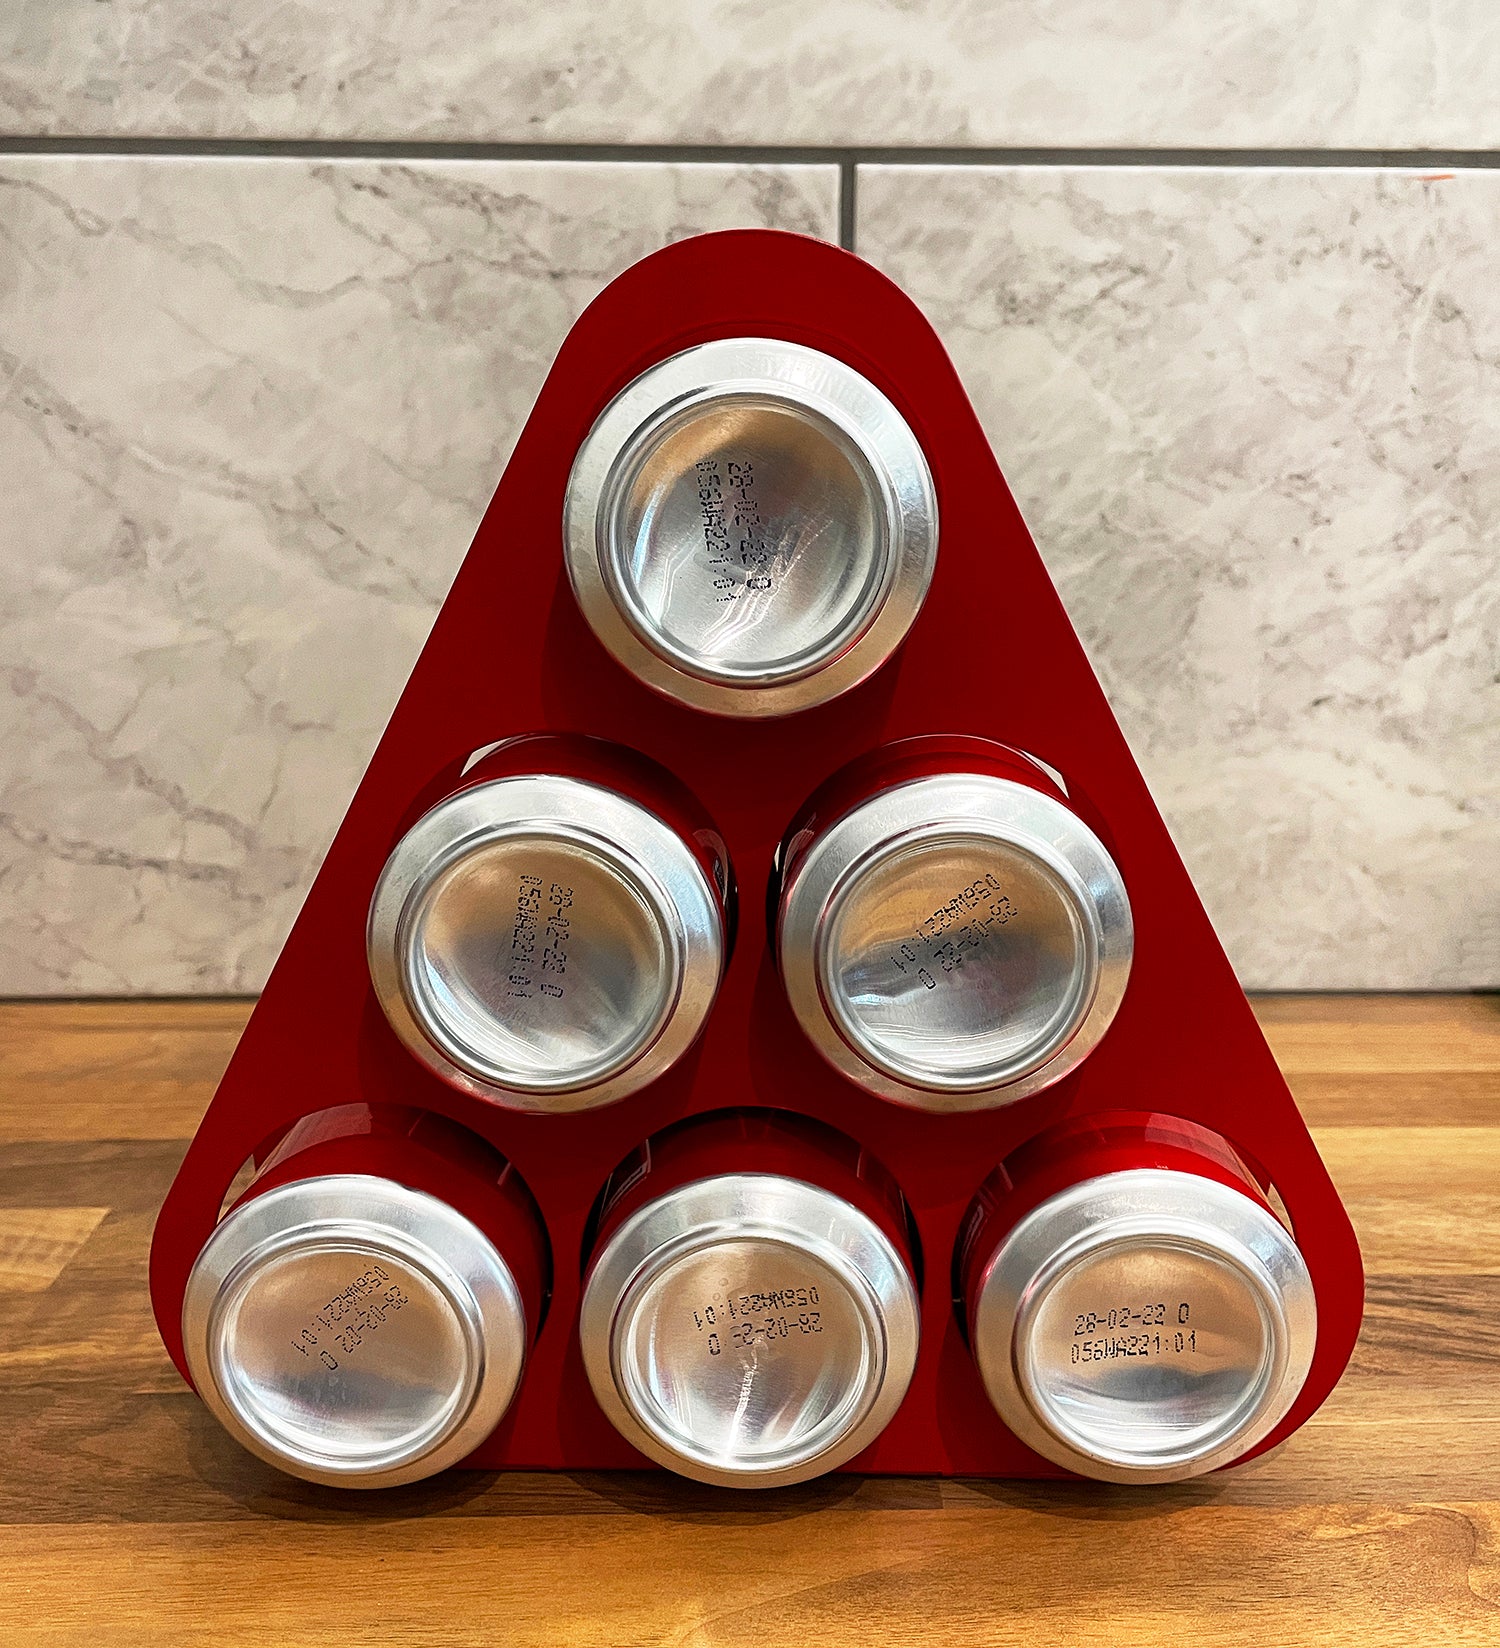 Soda Can Drinks Pyramid Rack (Silver,6 Can Capacity) - Indoor Outdoors